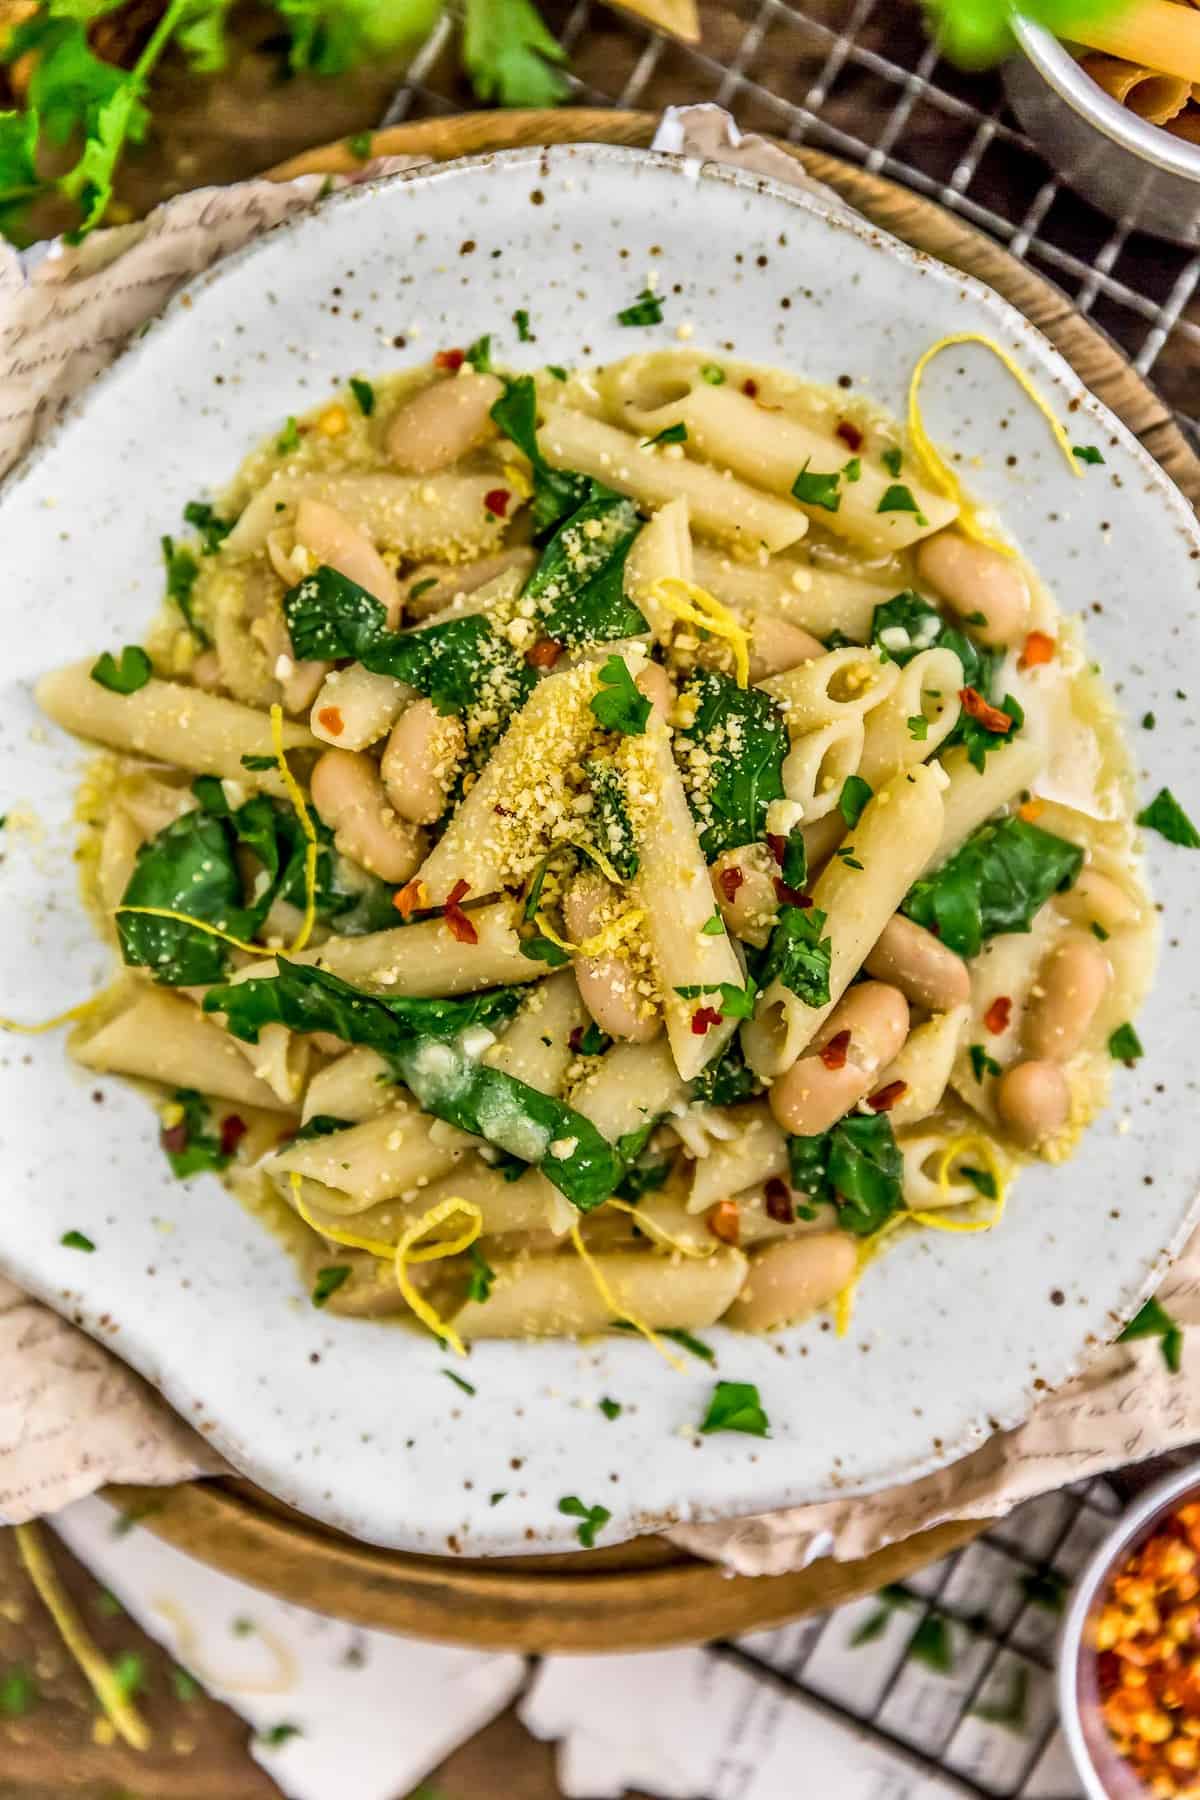 Lemony Pasta with Greens and Beans